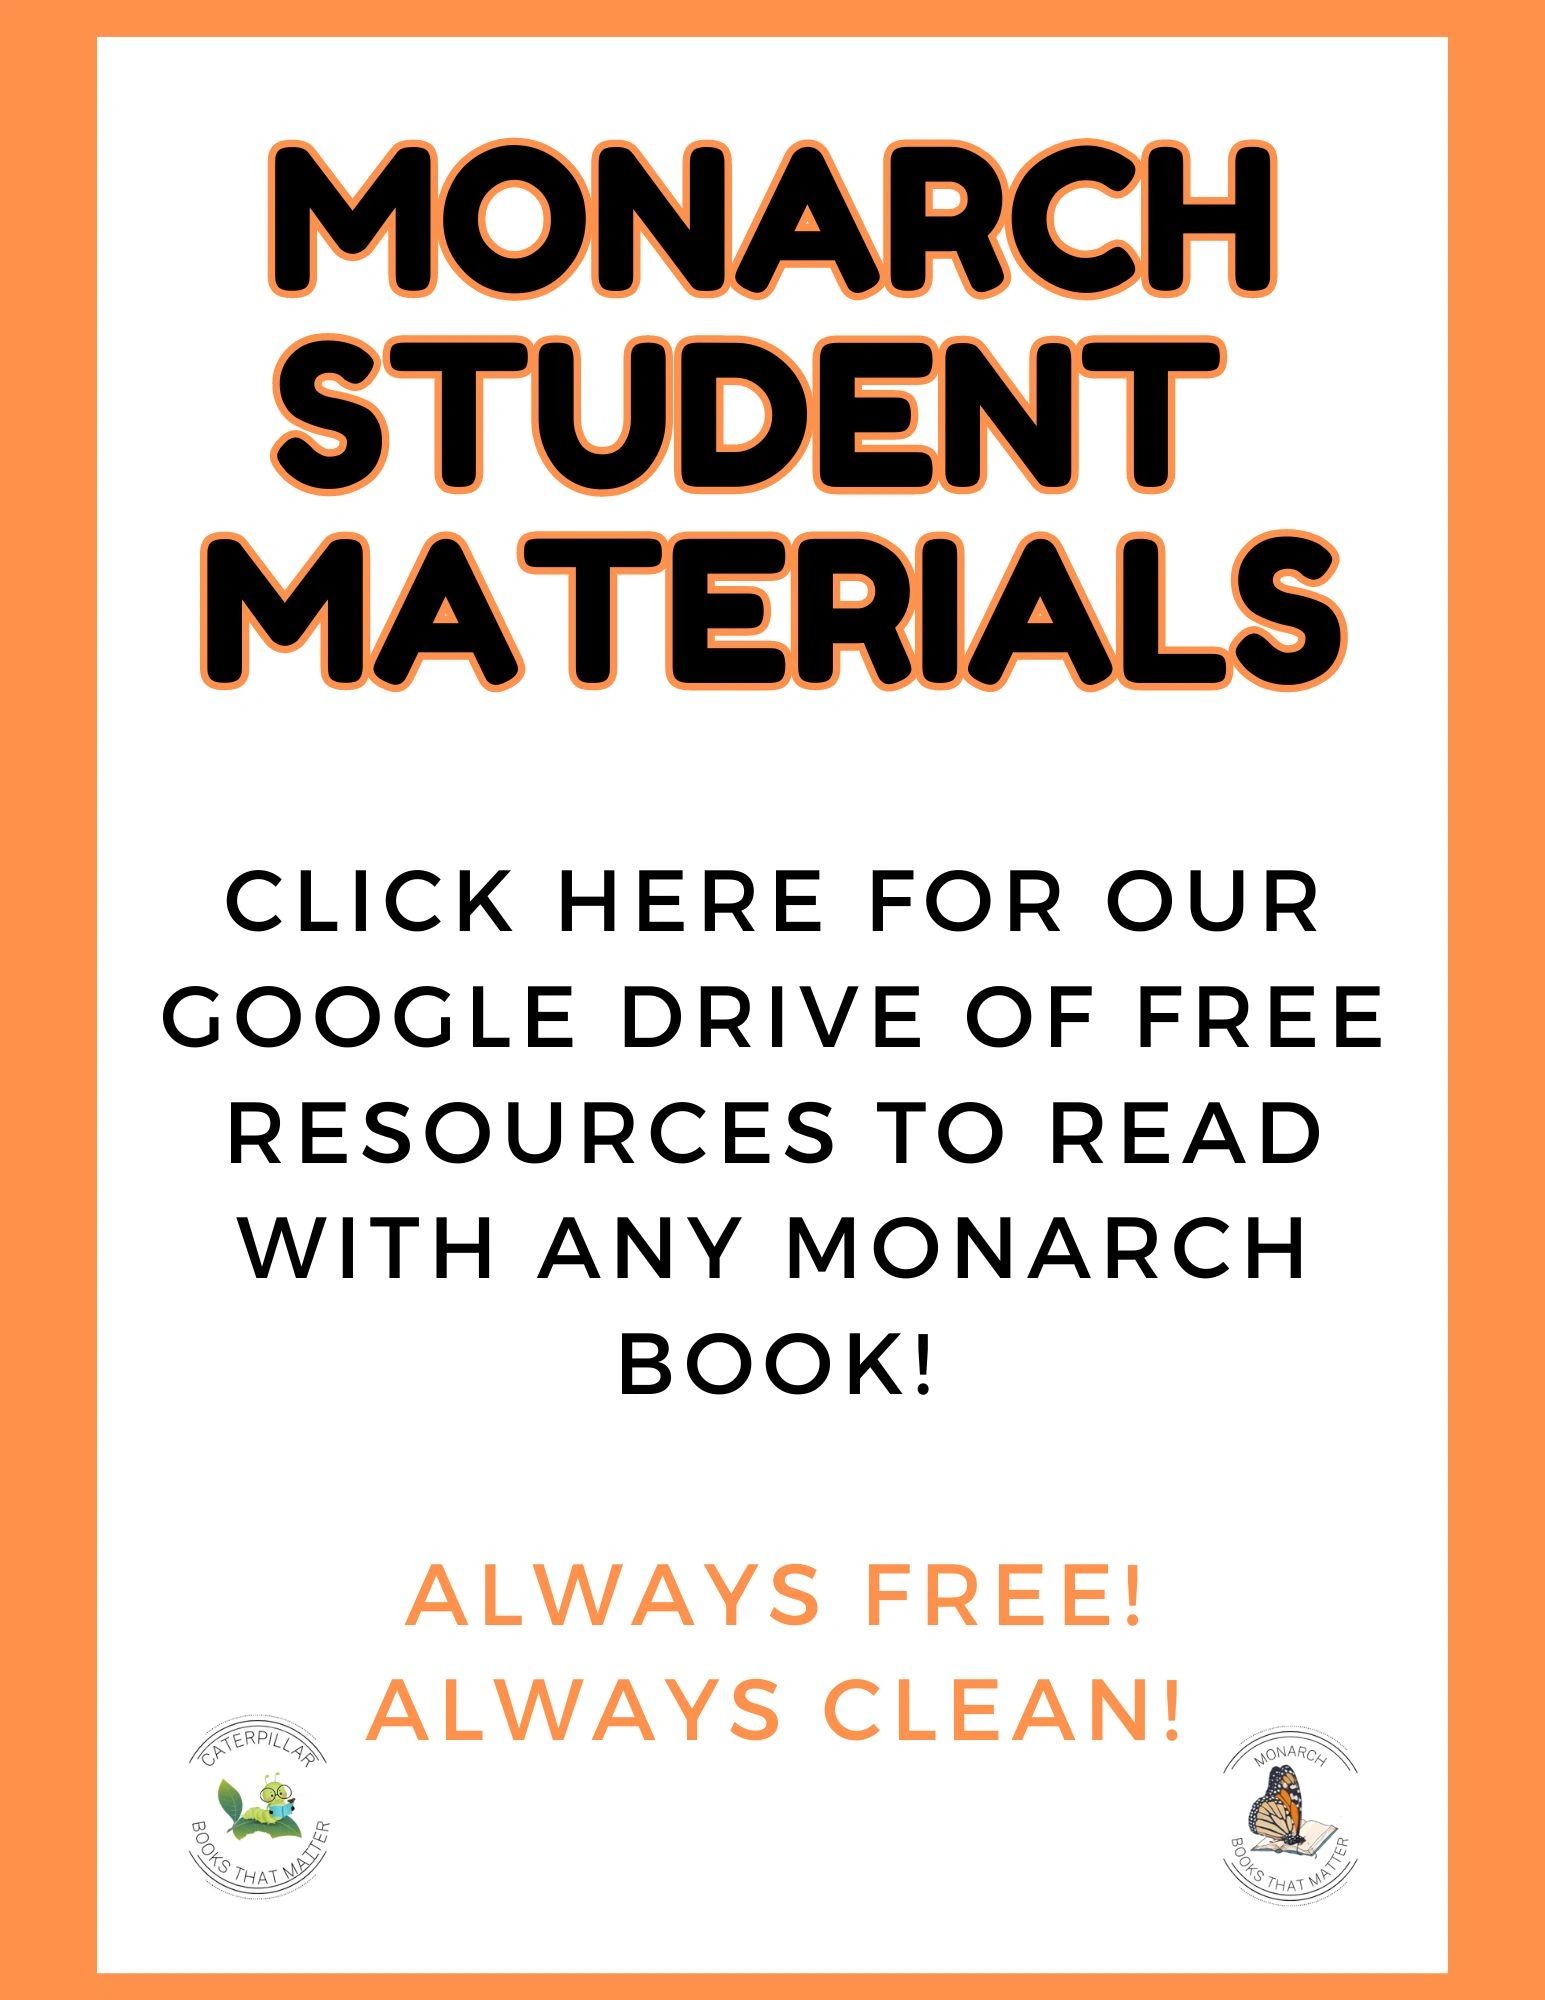 Click here for our Google Drive of Free Resources to Read with Any Monarch Book! Always Free & Clean